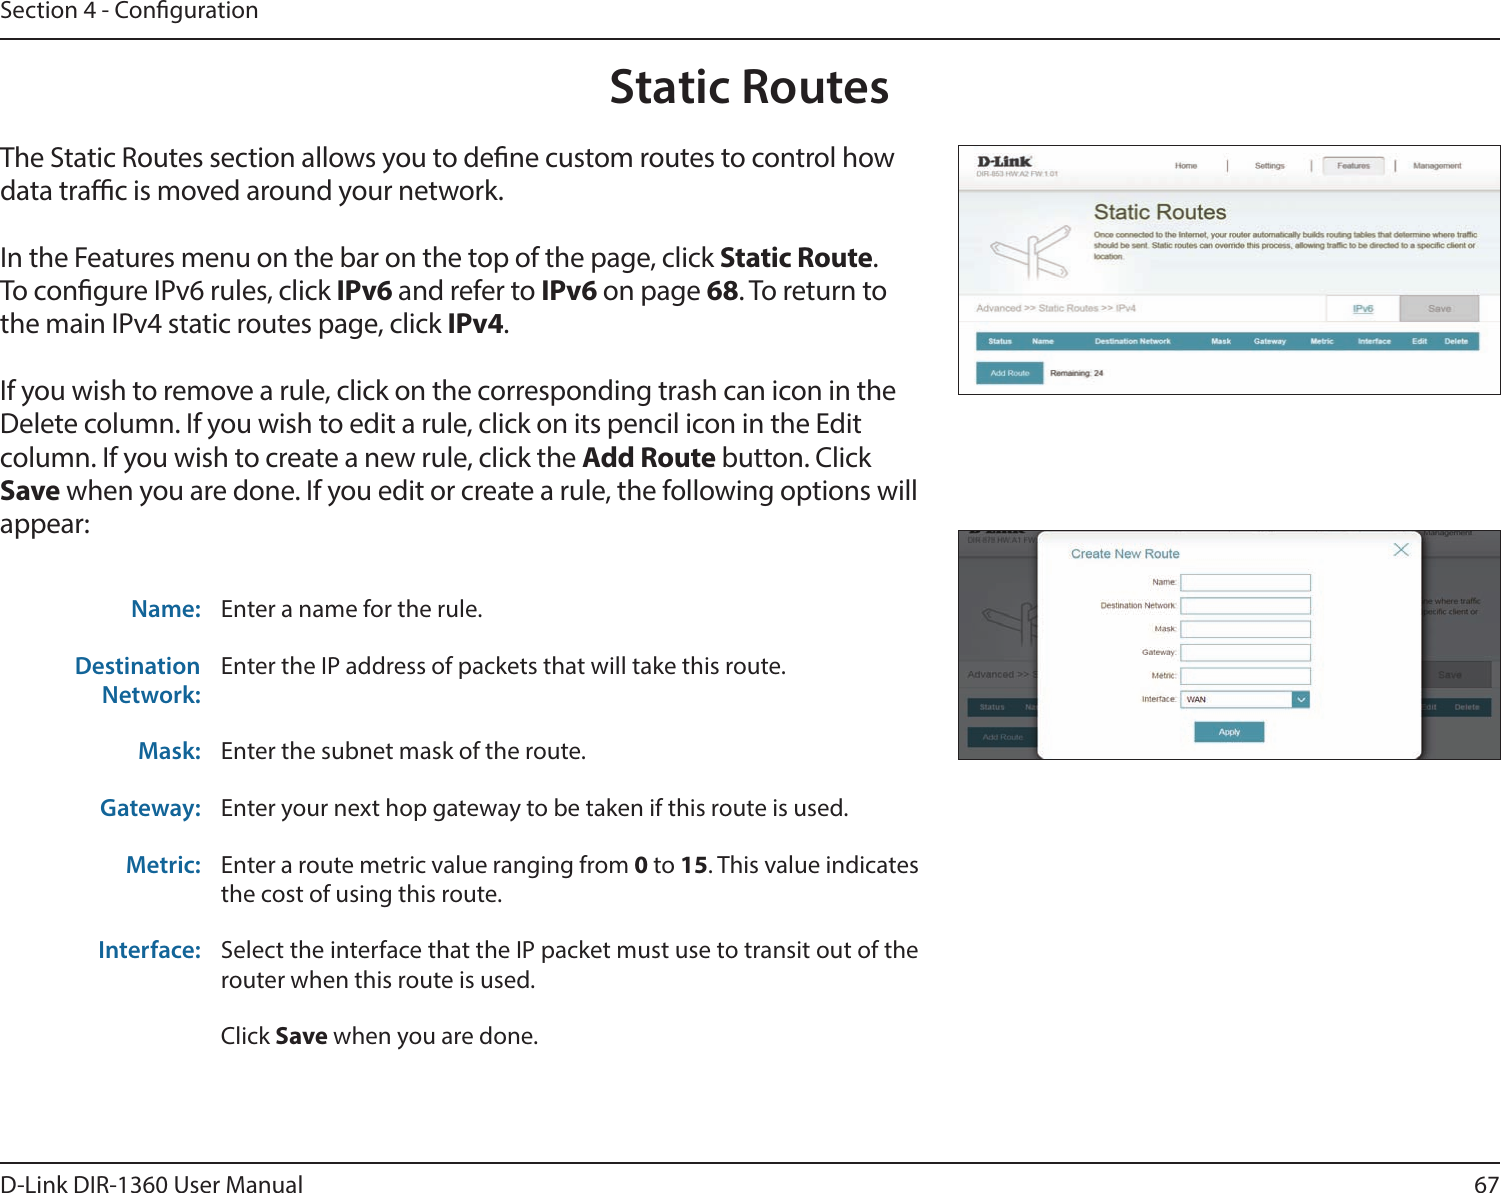 67D-Link DIR-1360 User ManualSection 4 - CongurationStatic RoutesThe Static Routes section allows you to dene custom routes to control how data trac is moved around your network.In the Features menu on the bar on the top of the page, click Static Route.To congure IPv6 rules, click IPv6 and refer to IPv6 on page 68. To return to the main IPv4 static routes page, click IPv4.If you wish to remove a rule, click on the corresponding trash can icon in the Delete column. If you wish to edit a rule, click on its pencil icon in the Edit column. If you wish to create a new rule, click the Add Route button. Click Save when you are done. If you edit or create a rule, the following options will appear:Name: Enter a name for the rule.Destination Network:Enter the IP address of packets that will take this route.Mask: Enter the subnet mask of the route.Gateway: Enter your next hop gateway to be taken if this route is used.Metric: Enter a route metric value ranging from 0 to 15. This value indicates the cost of using this route. Interface: Select the interface that the IP packet must use to transit out of the router when this route is used. Click Save when you are done.